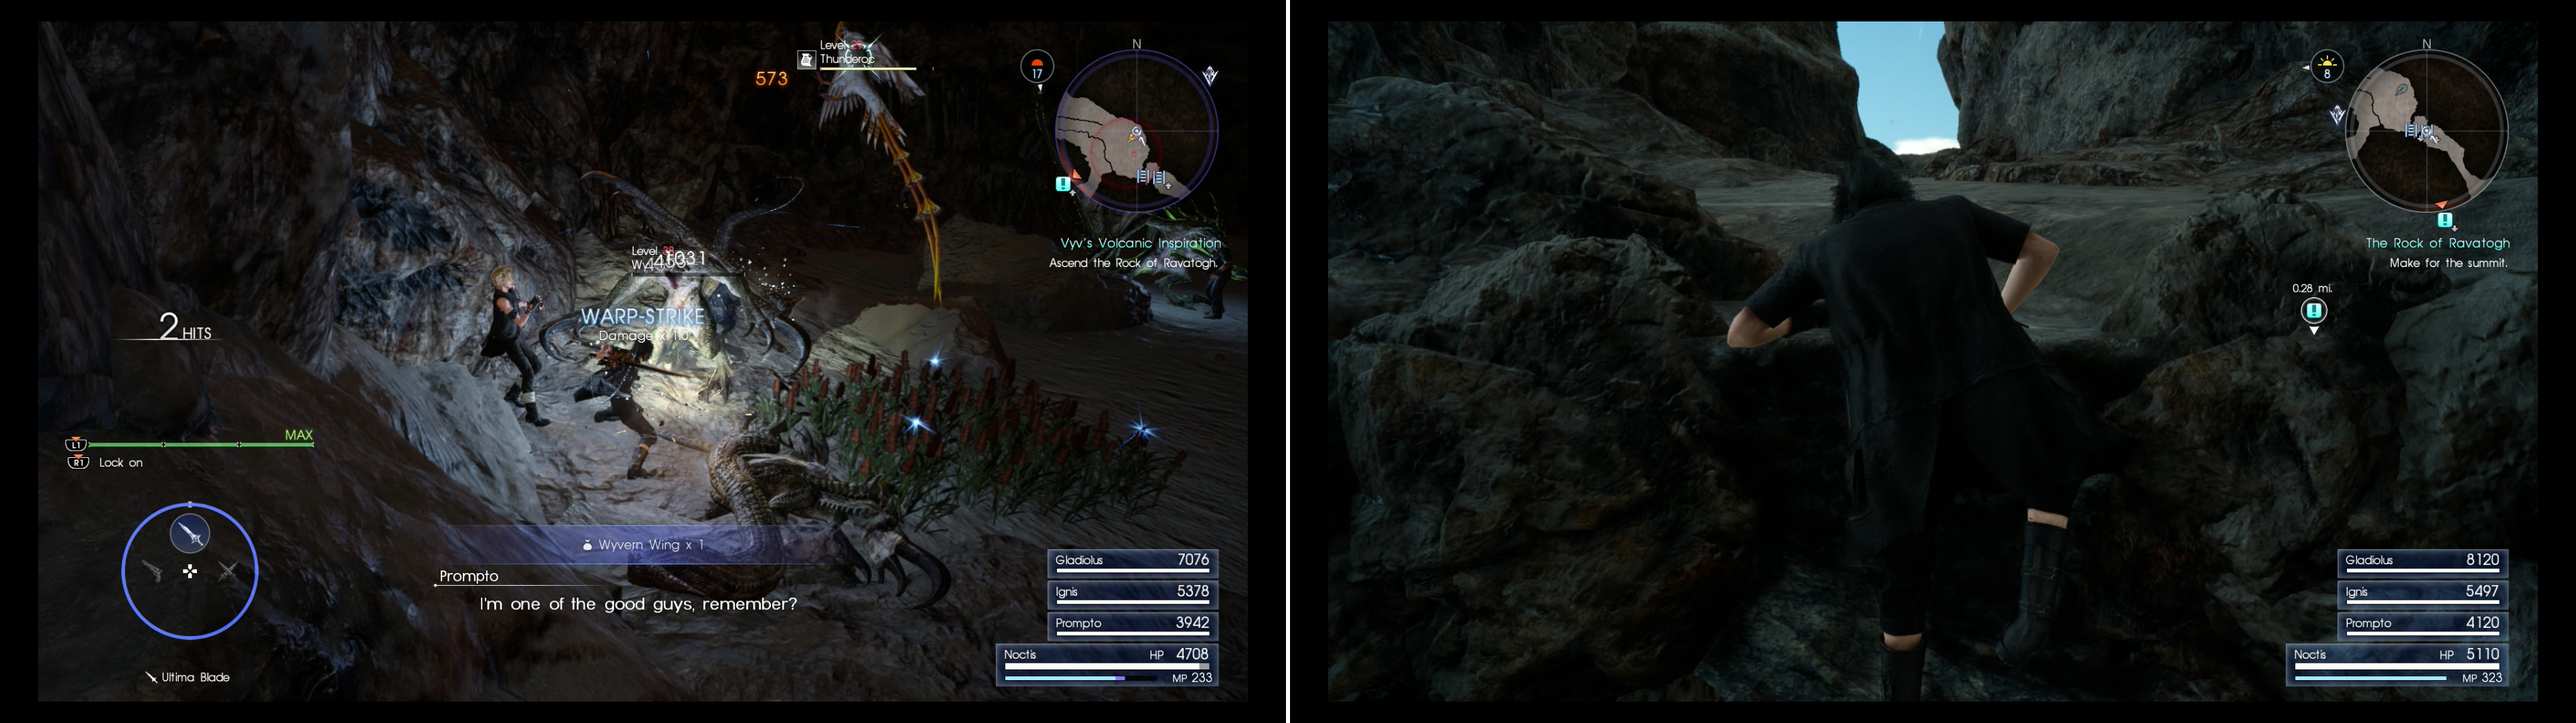 Kill Wyverns to harvest Wyvern Wings for Sania (left). To reach the summit of Ravatogh you’ll need to climb some sheer cliffs (right).